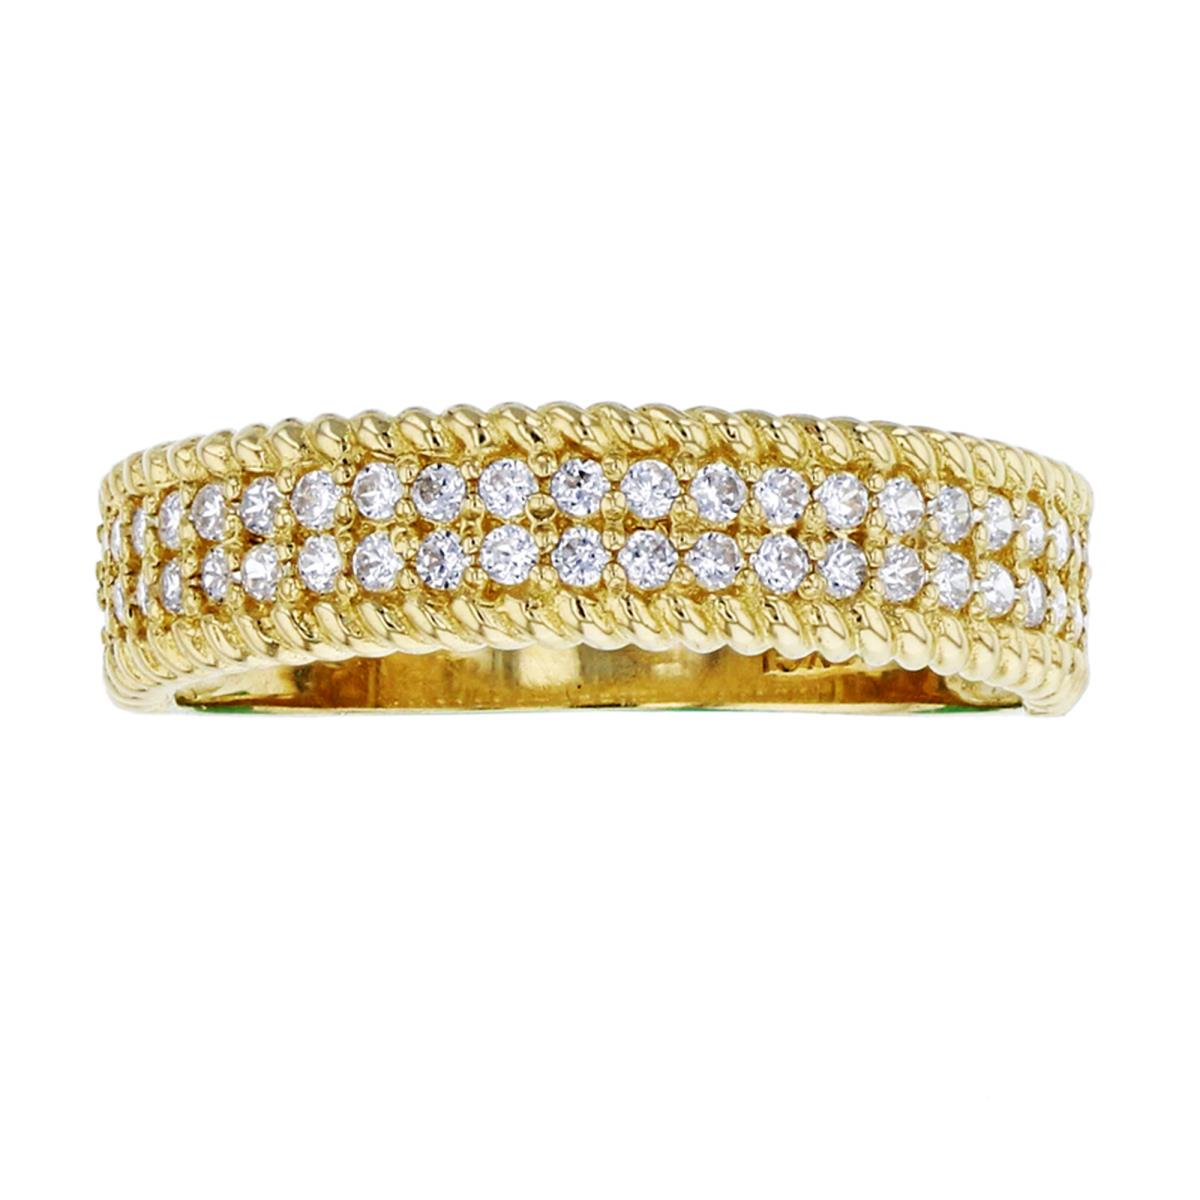 10K Yellow Gold Pave Rd Two-Row Milgrain Fashion Band Ring